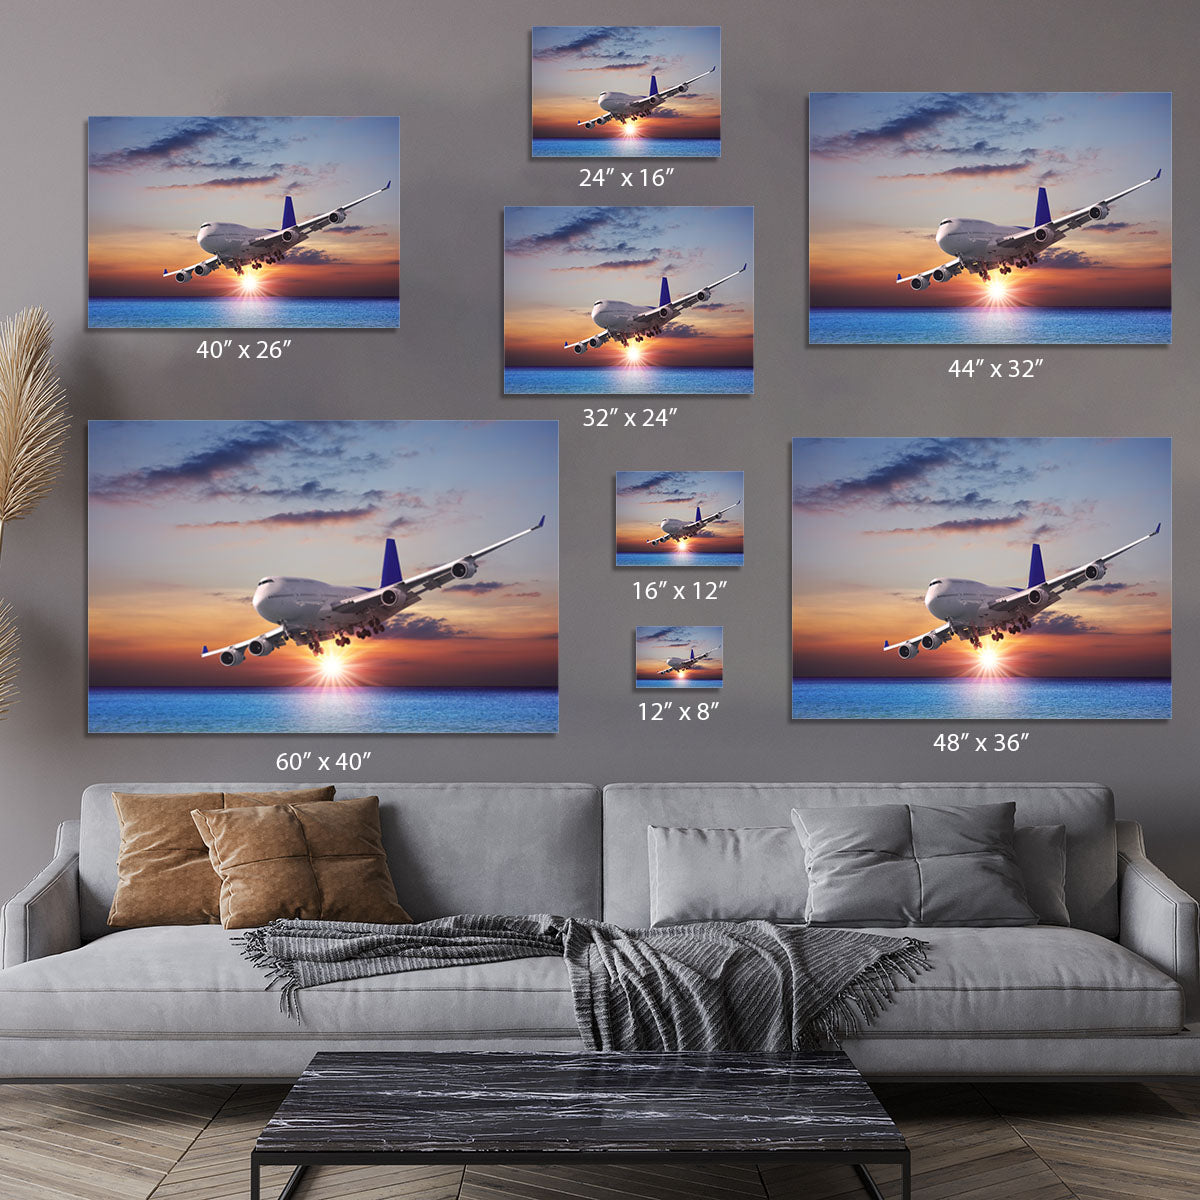 Jet liner over the sea at dusk Canvas Print or Poster - Canvas Art Rocks - 7